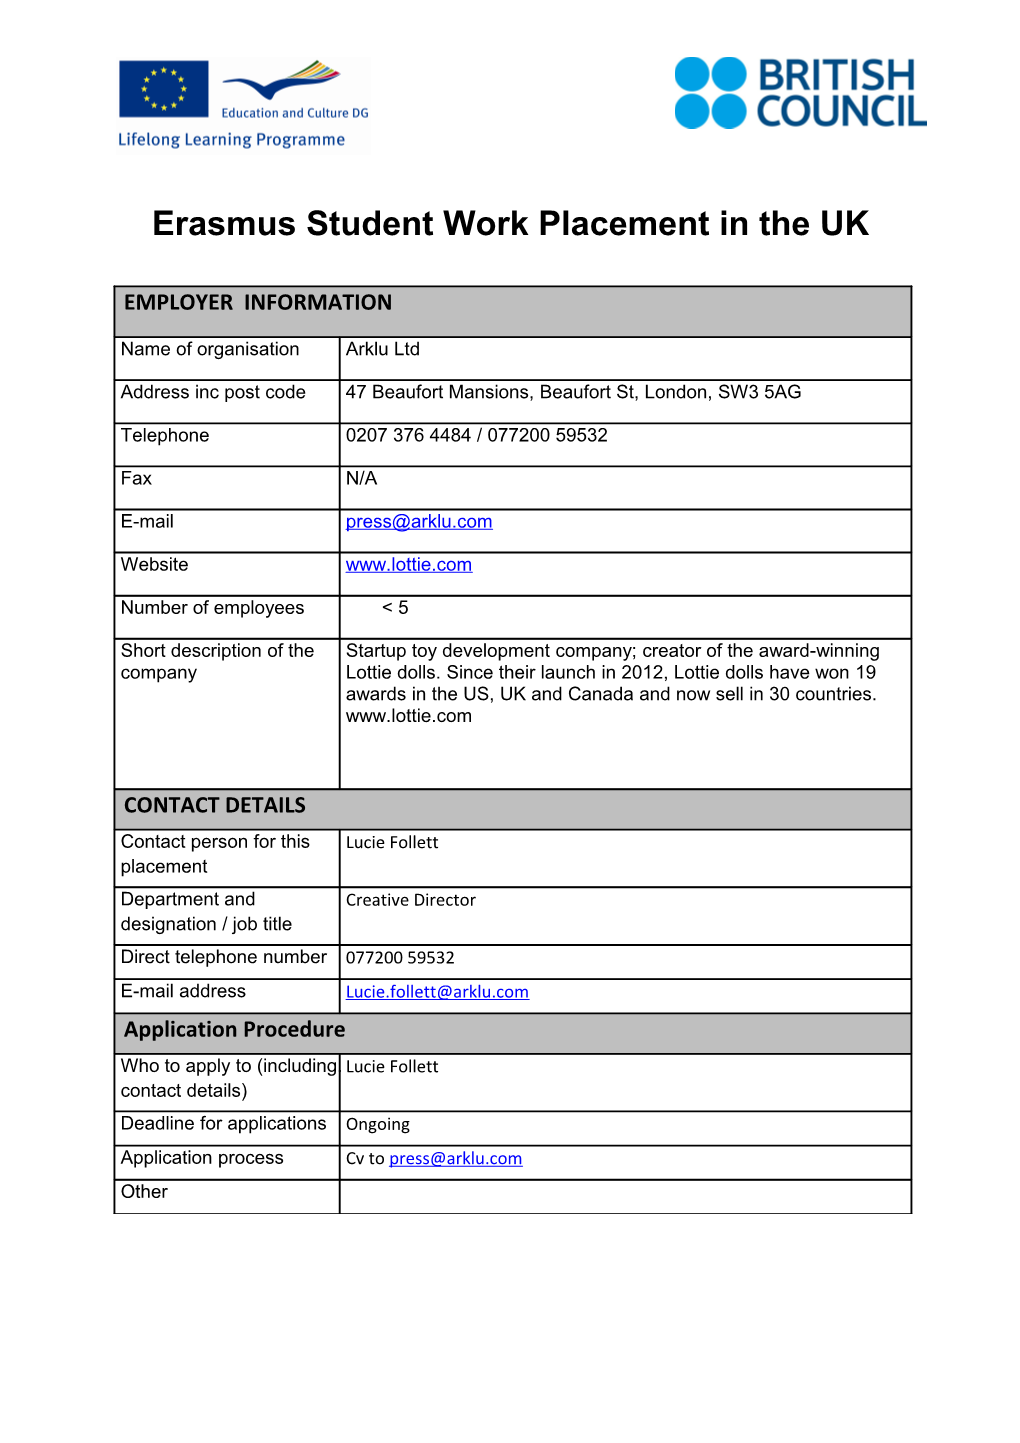 Erasmus Student Work Placement in the UK s3